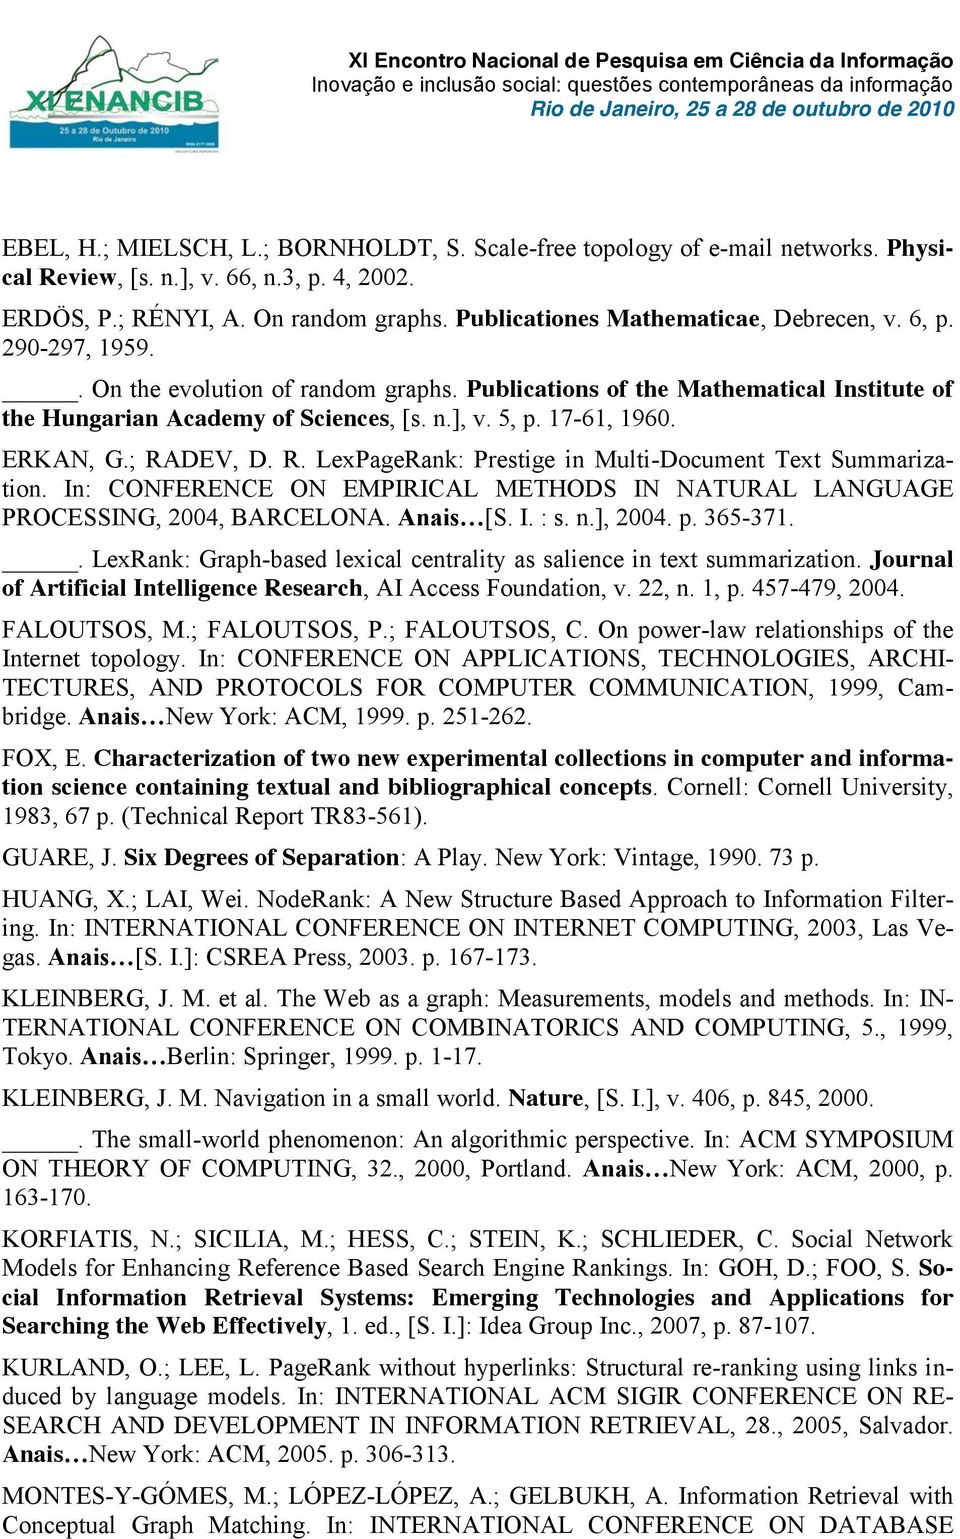 DEV, D. R. LexPageRank: Prestge n Mult-Document Text Summarzaton. In: CONFERENCE ON EMPIRICAL METHODS IN NATURAL LANGUAGE PROCESSING, 2004, BARCELONA. Anas [S. I. : s. n.], 2004. p. 365-371.